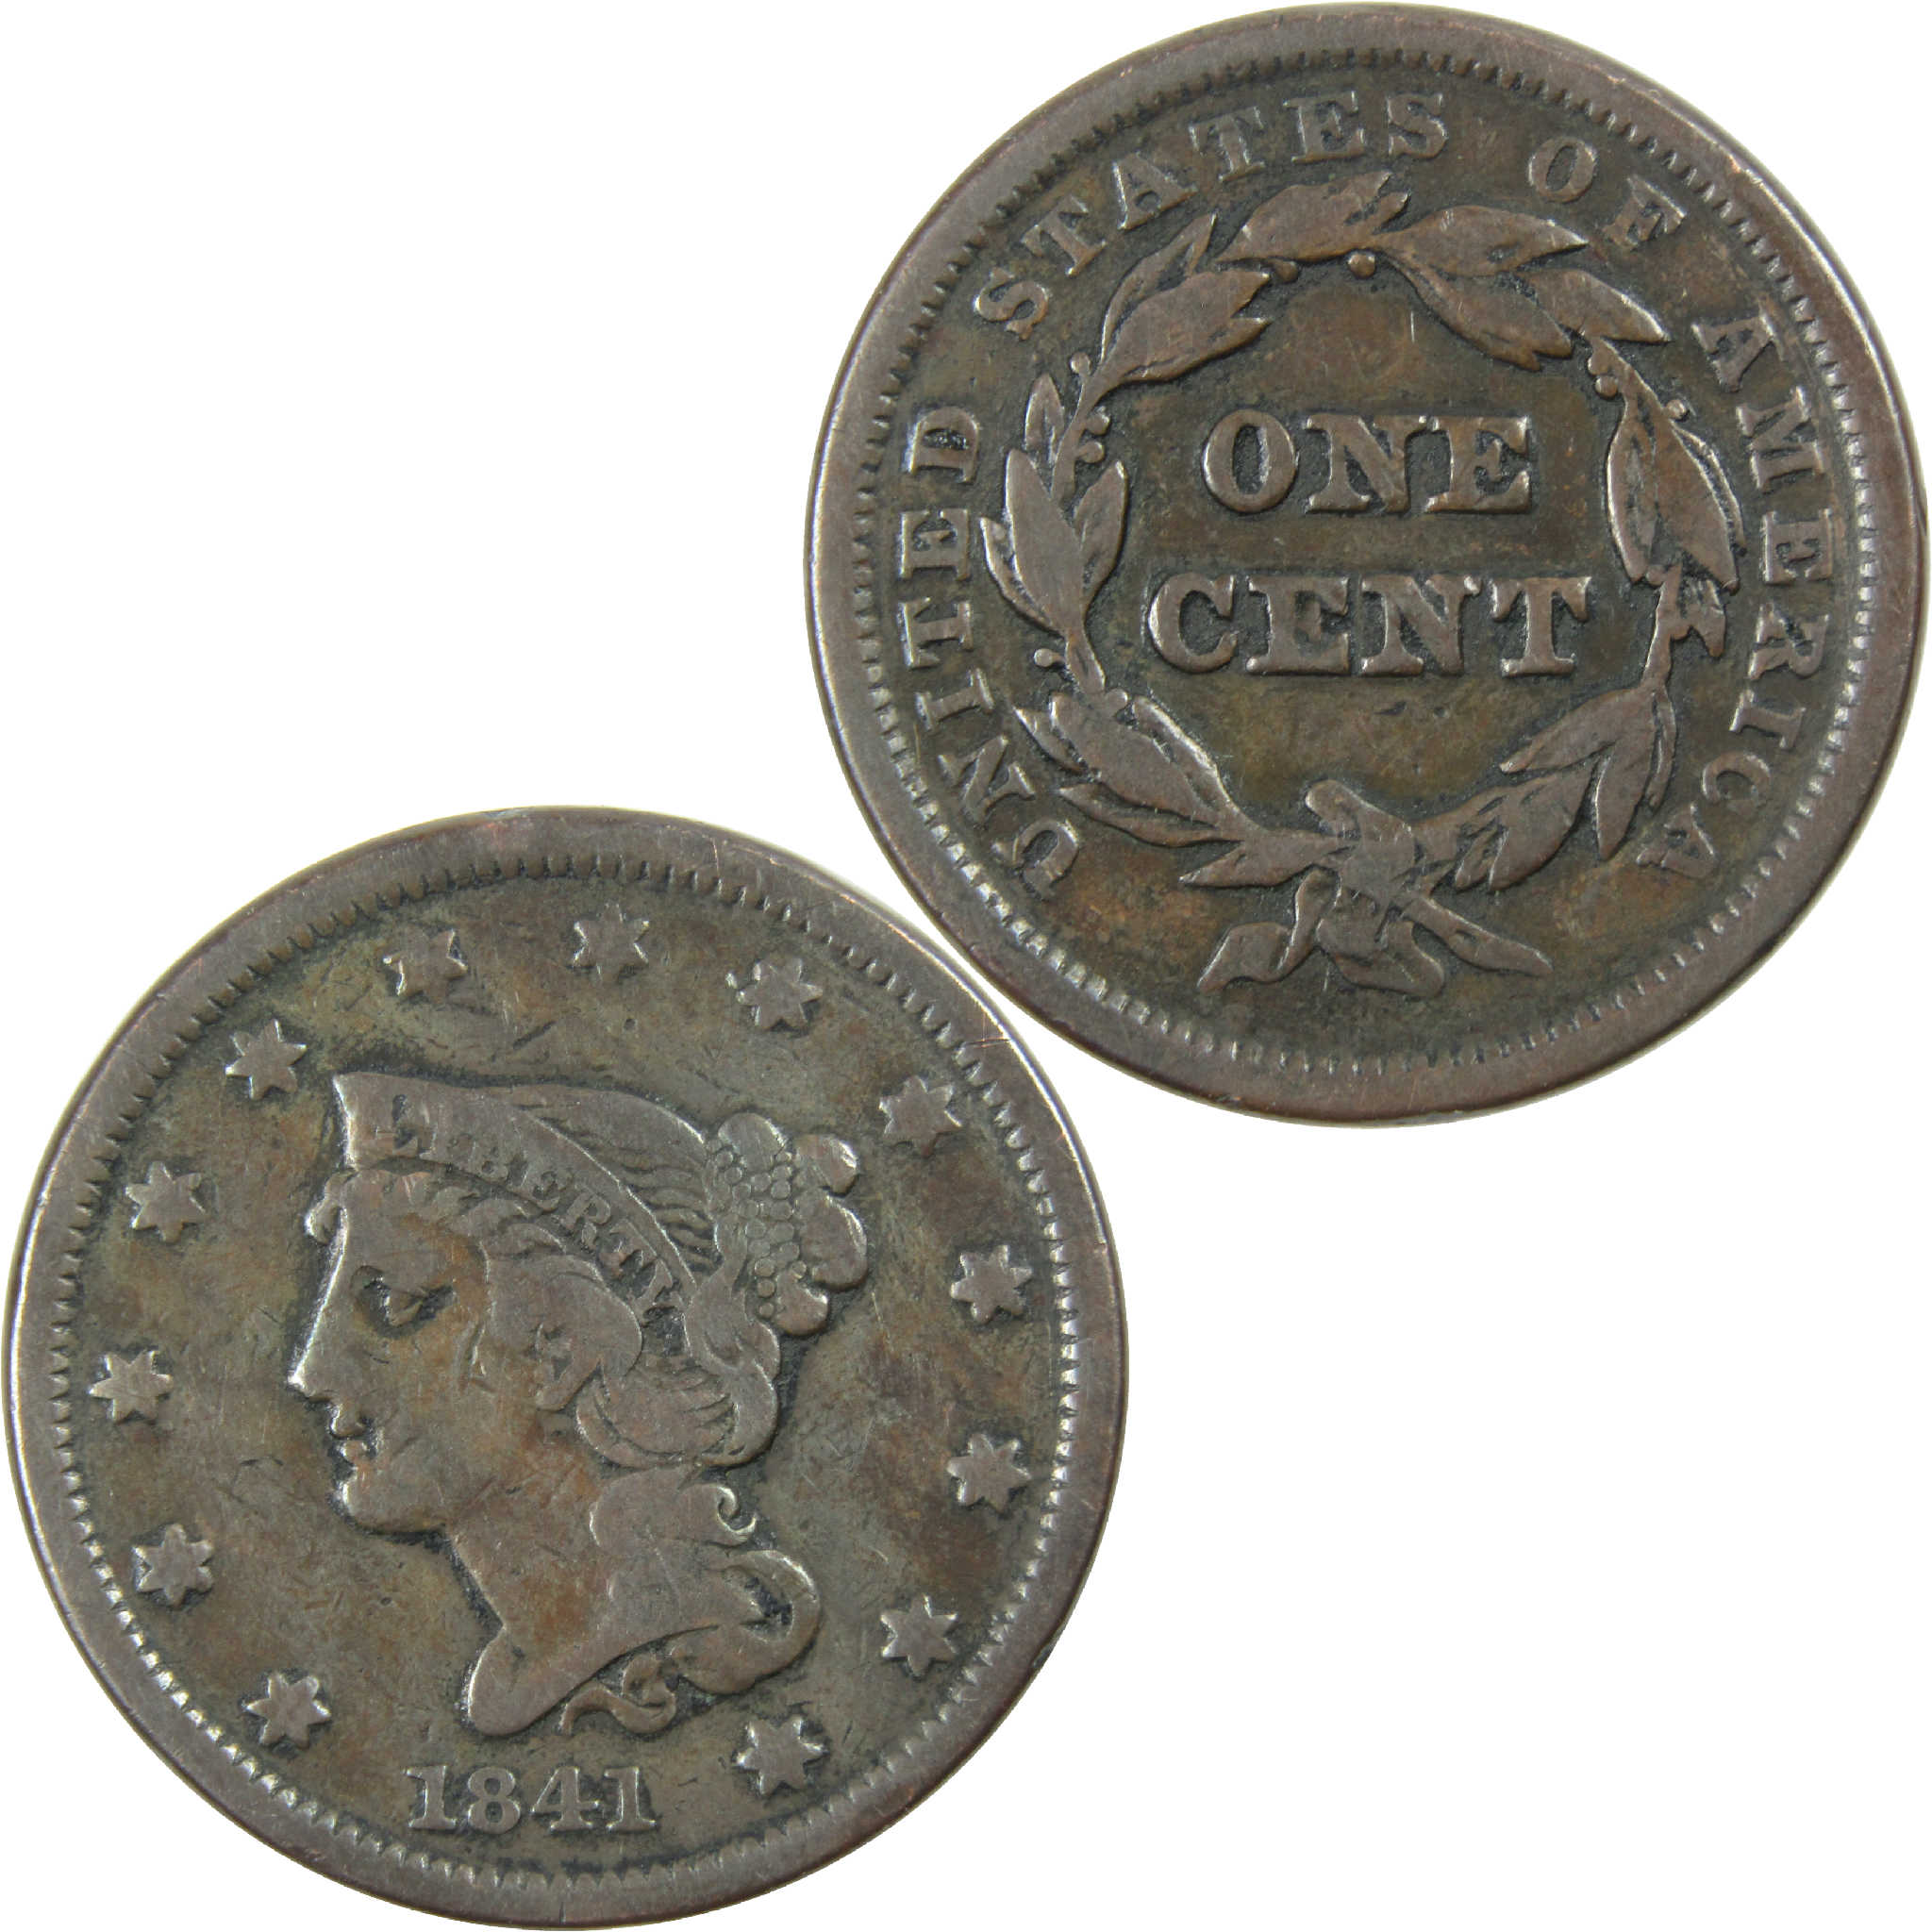 1841 Braided Hair Large Cent F Fine Copper Penny 1c Coin SKU:I12161